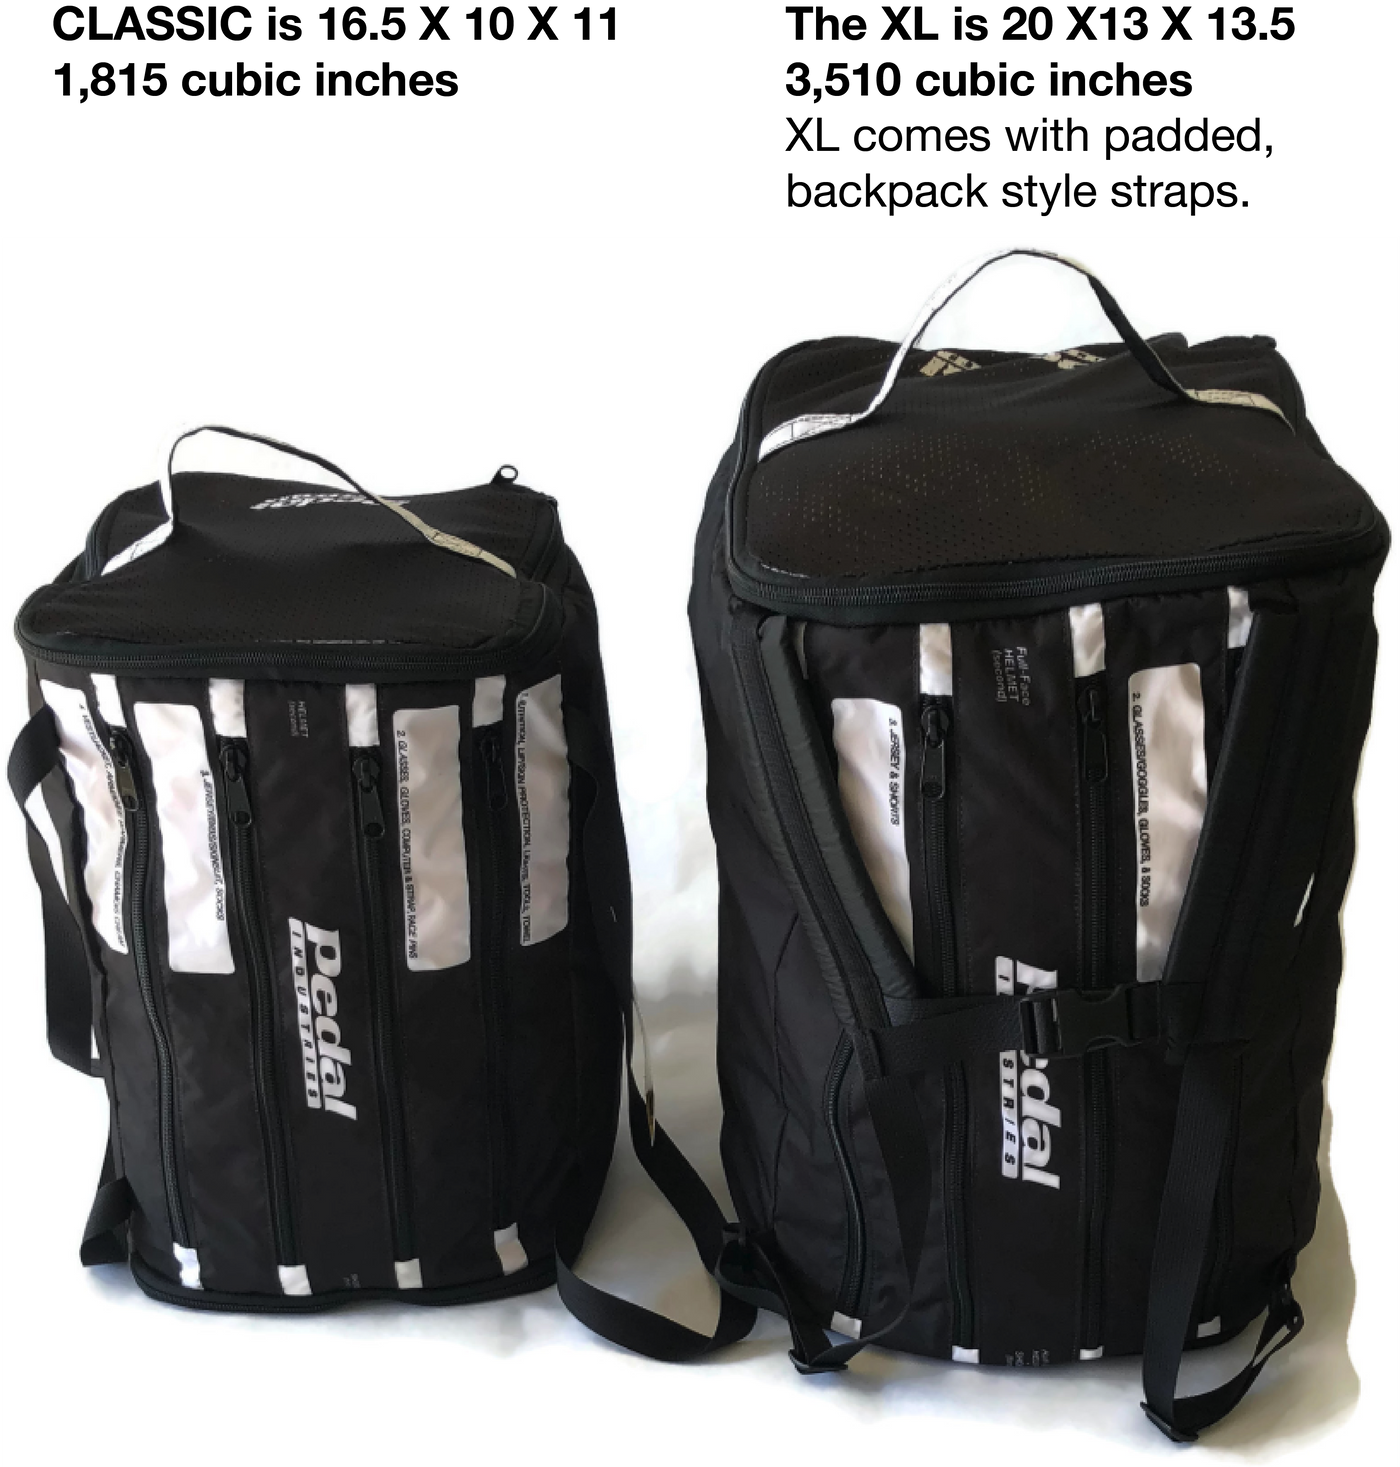 Sonoran Cycles RACEDAY BAG - ships in about 3 weeks